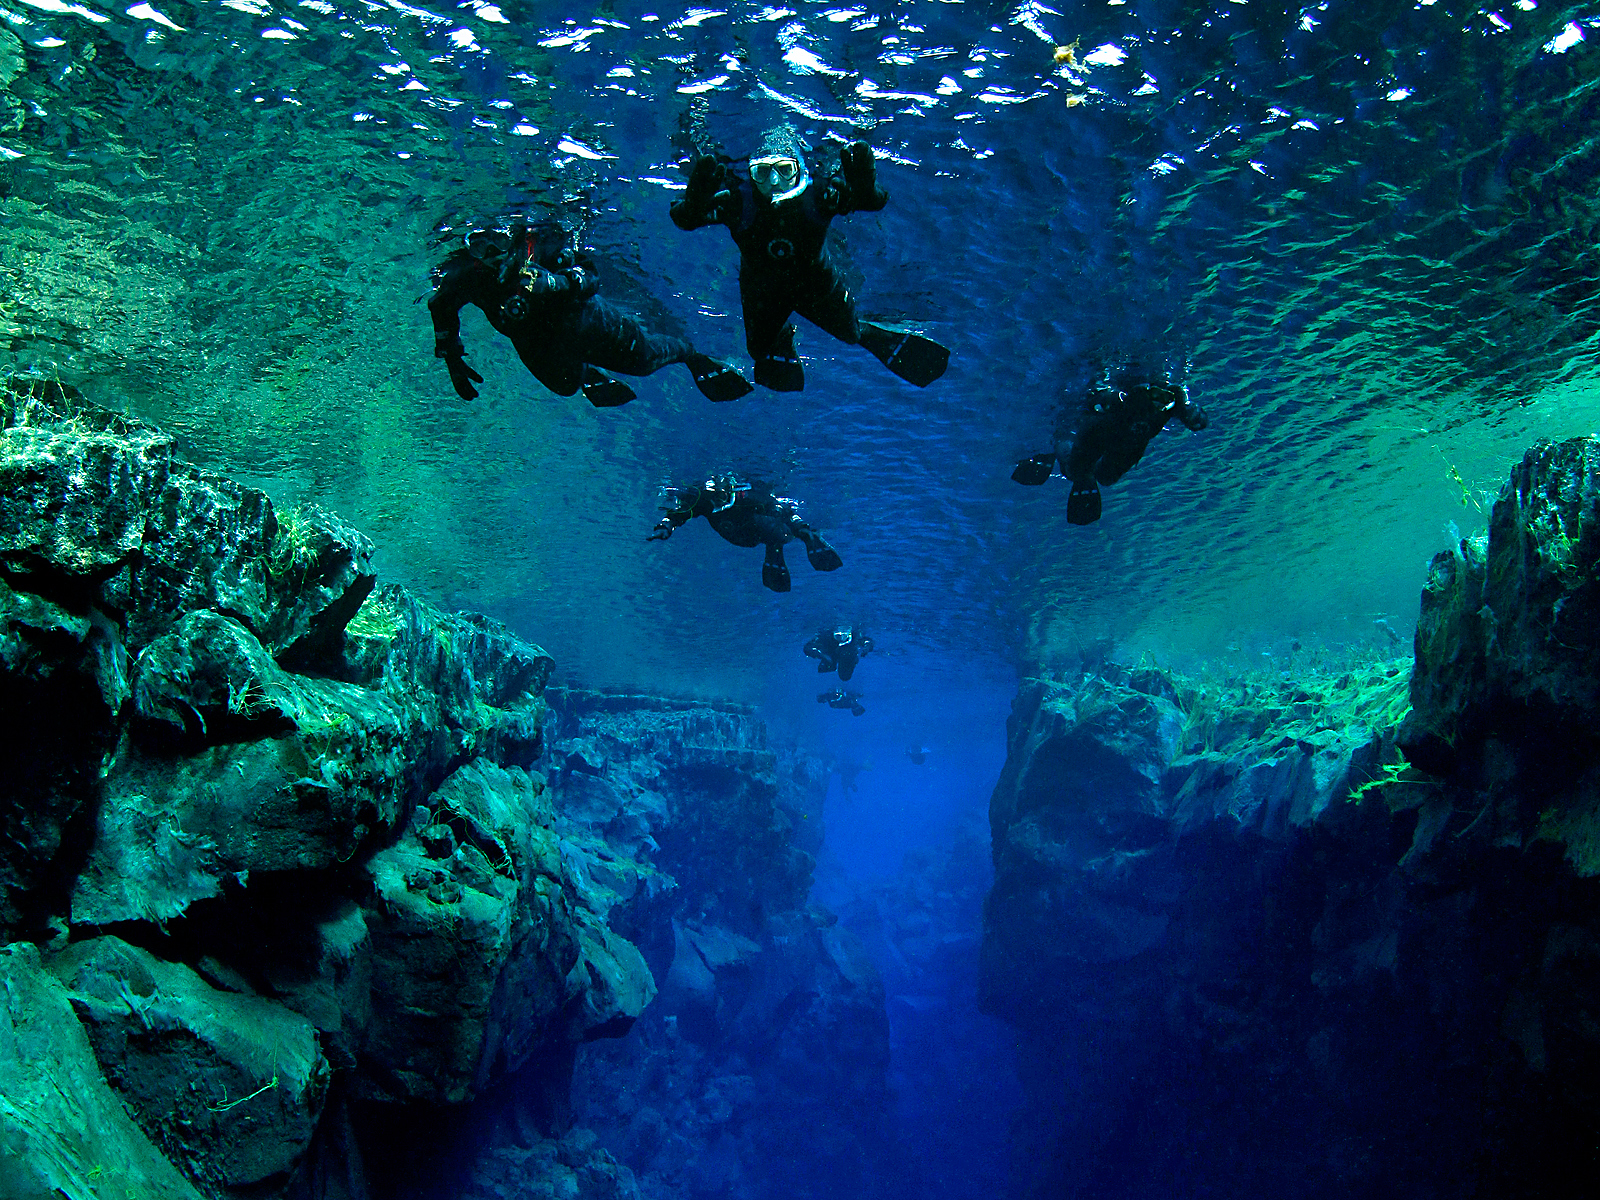 Silfra Fissure is often cited as one of the Top 10 scuba diving and snorkelling sites in the world.